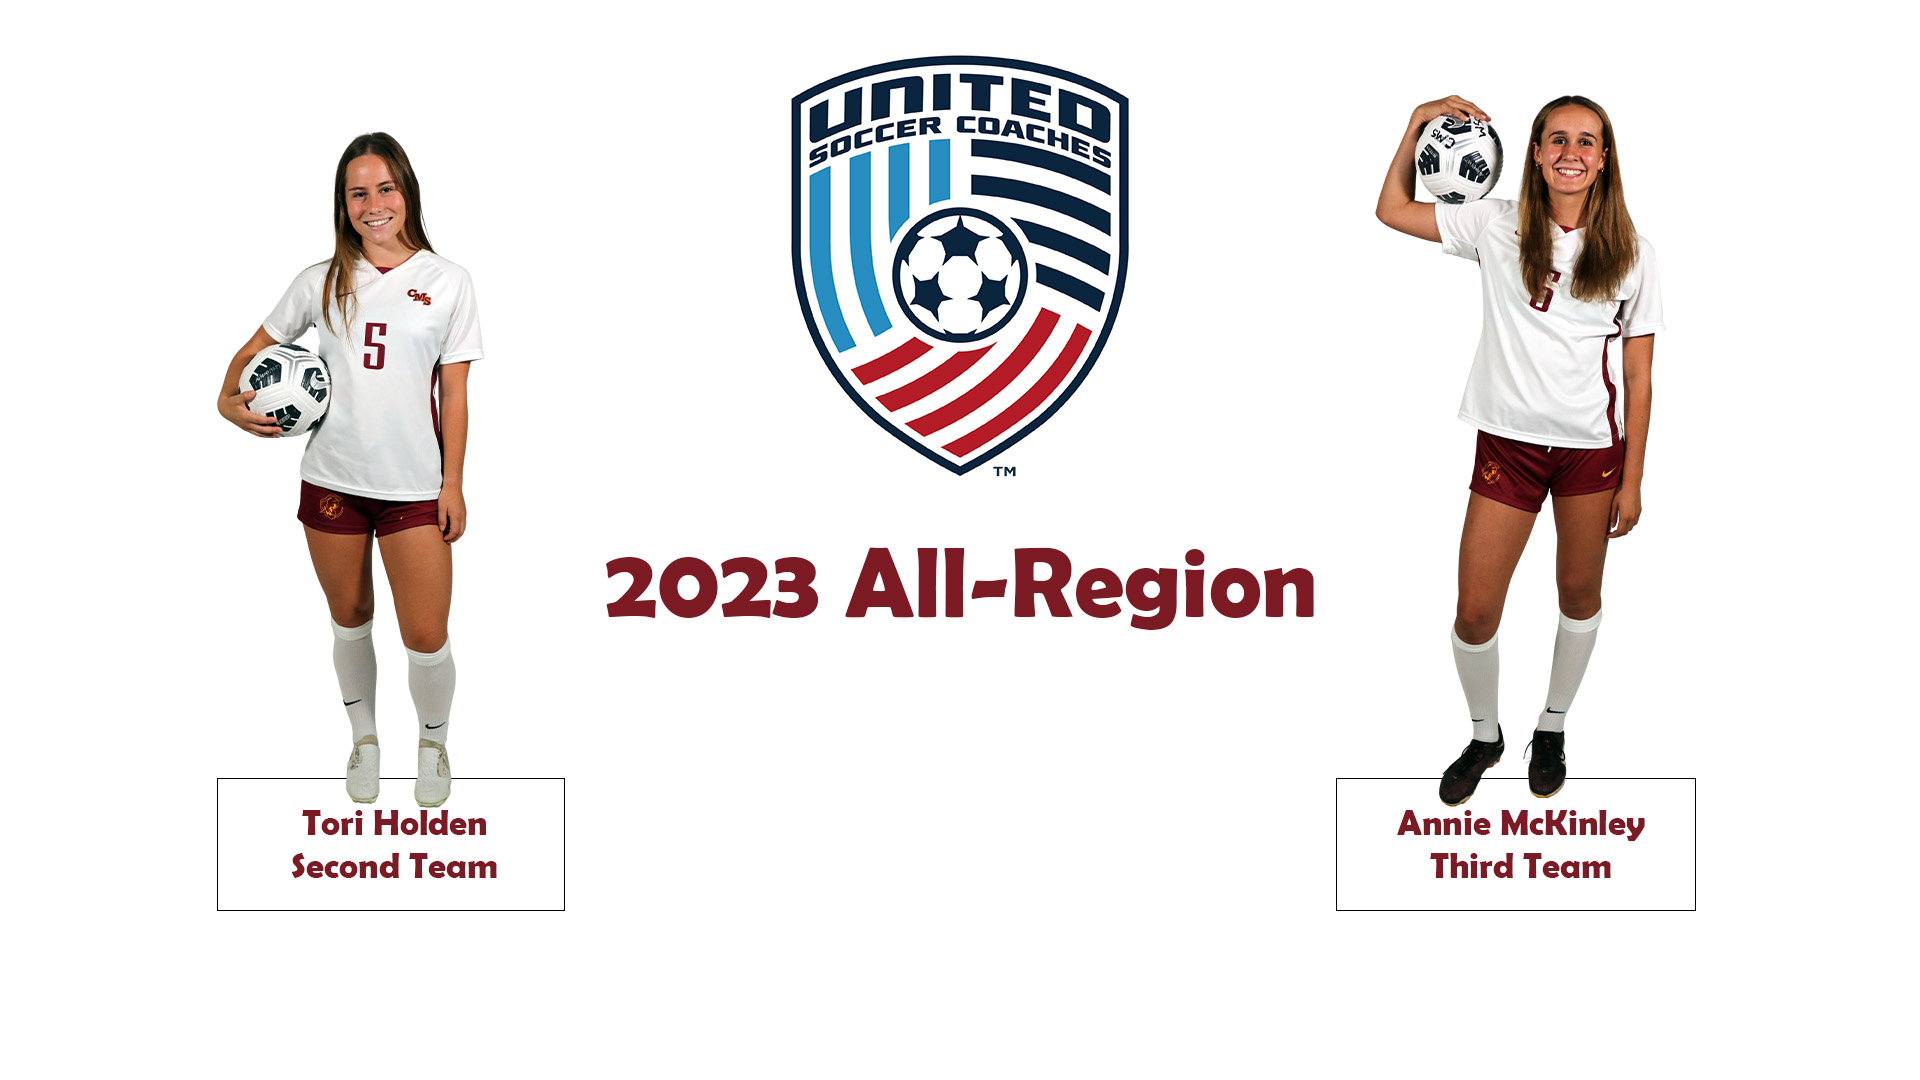 Posed shots of Tori Holden and Annie McKinley with the United Soccer Coaches logo